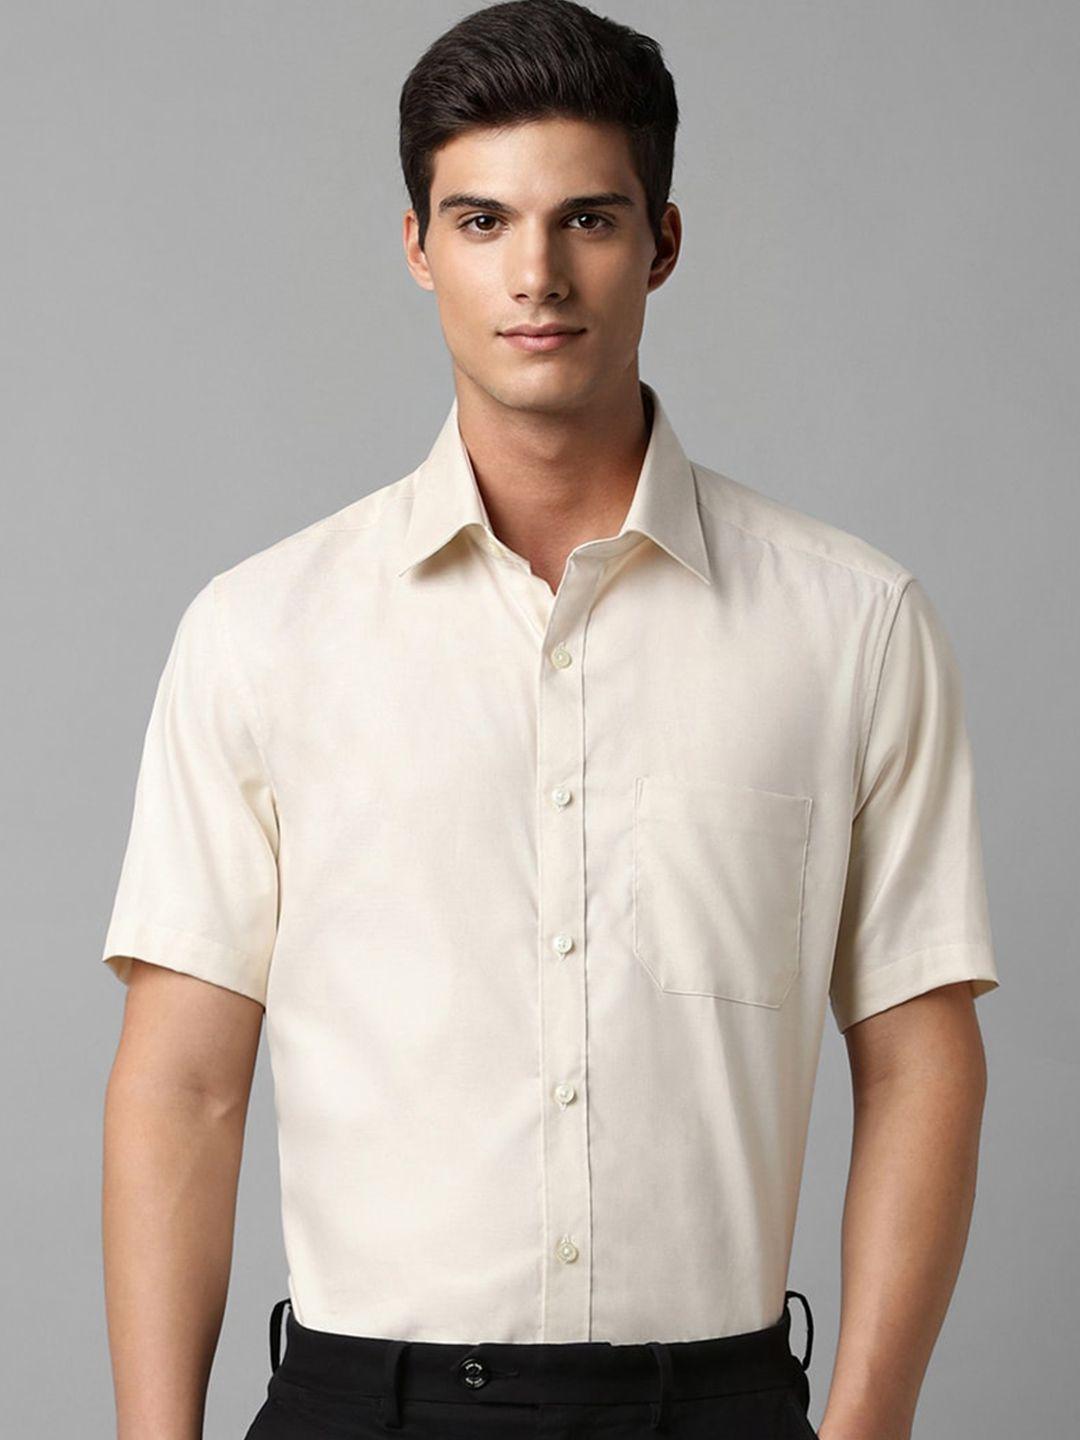 louis-philippe-spread-collar-regular-fit-opaque-cotton-formal-shirt